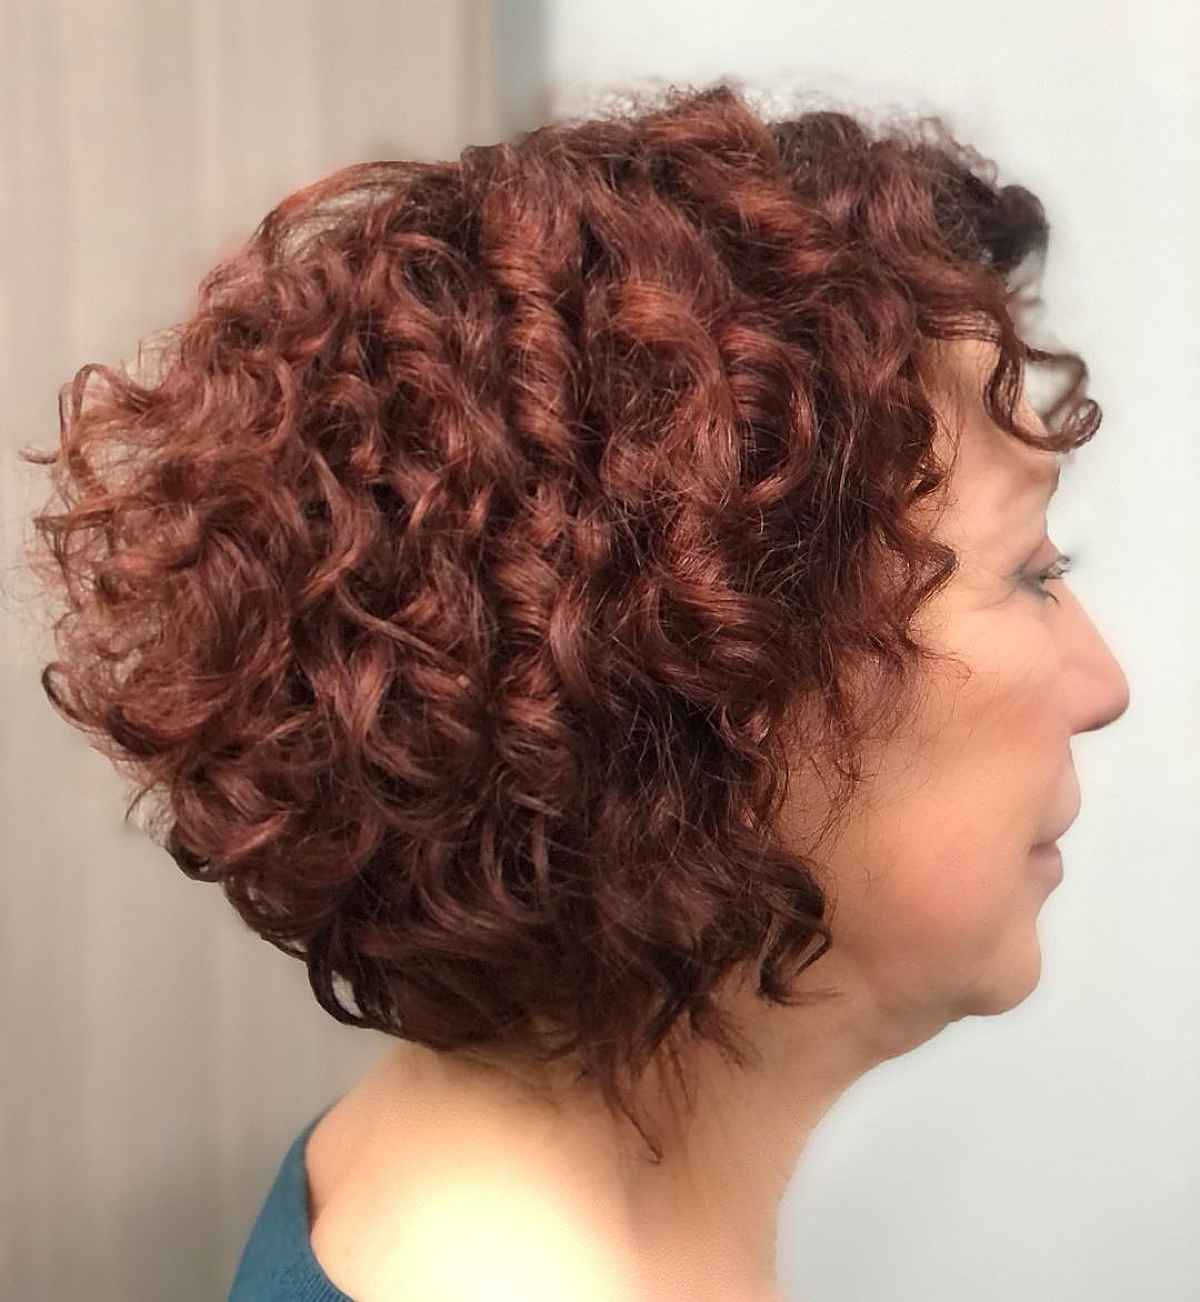 Angled Bob for Curly Hair for women in their 60s